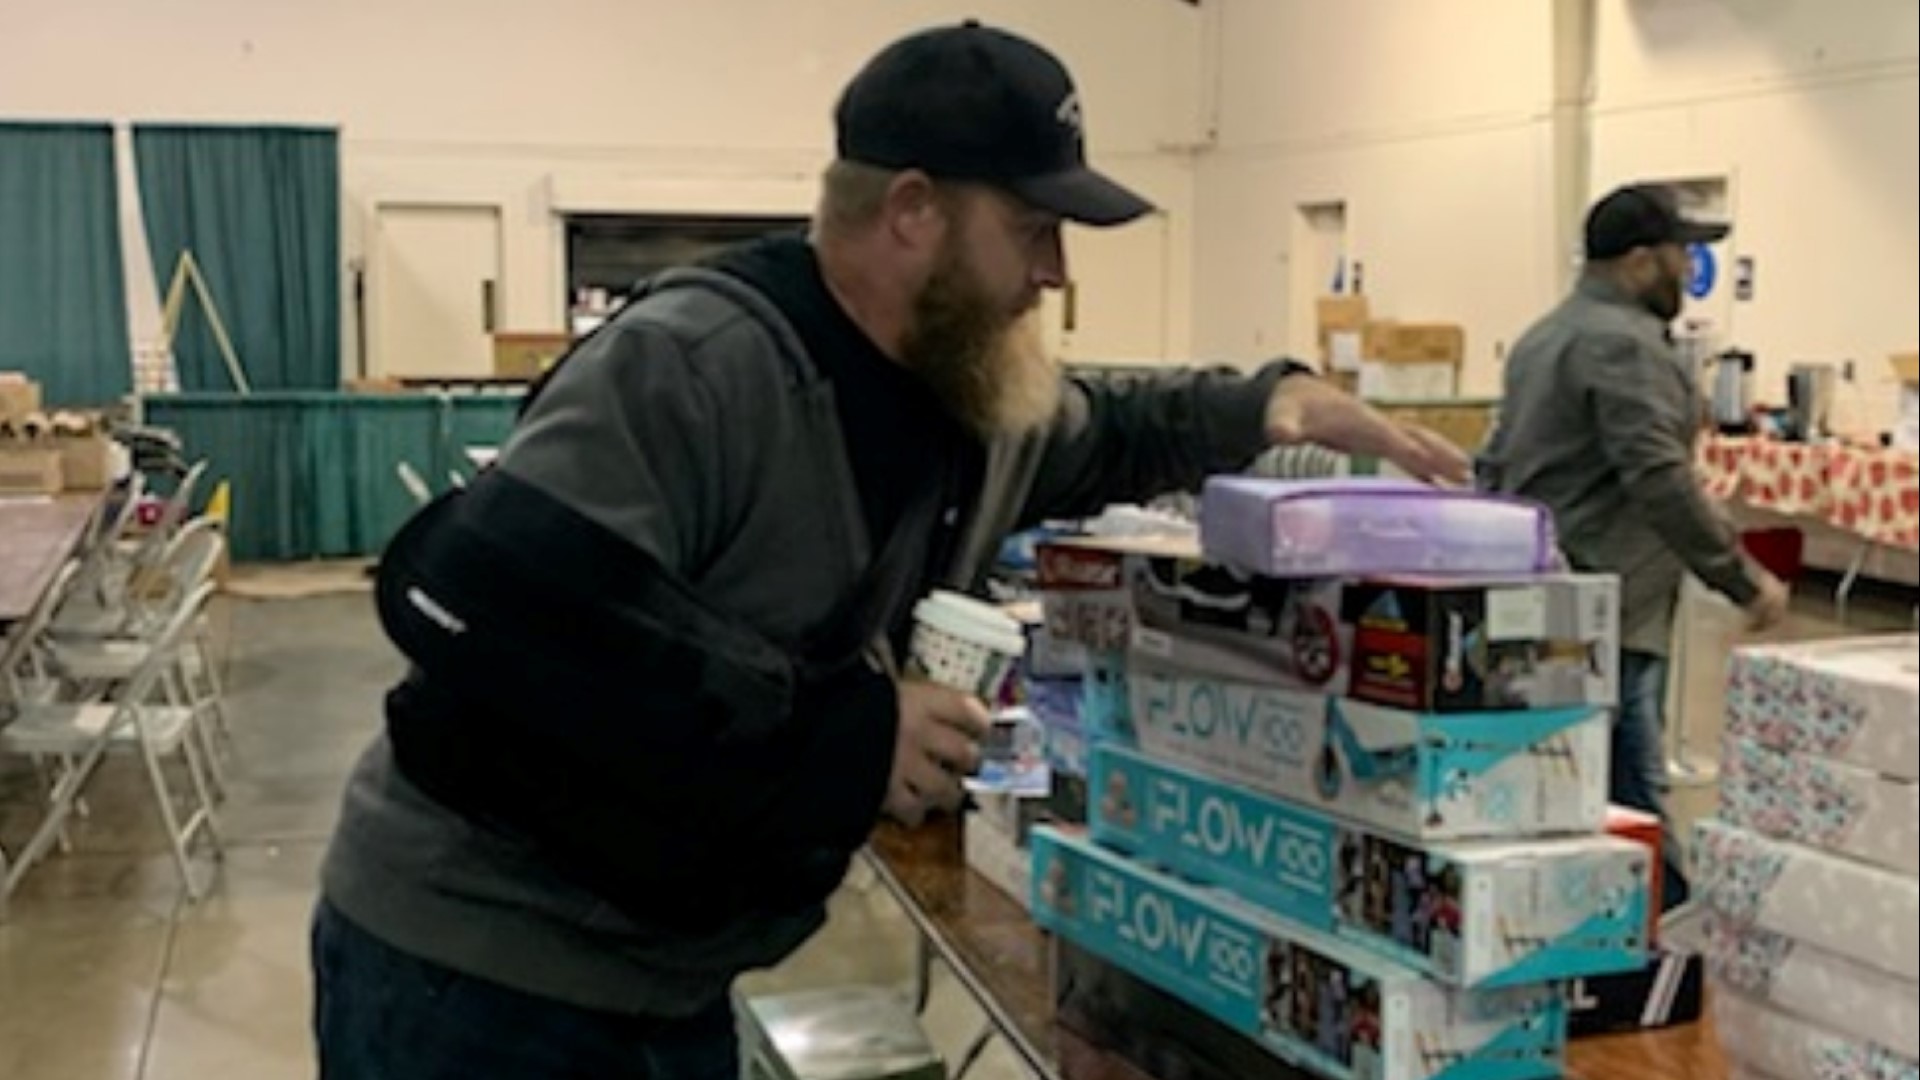 Every year a community dinner is held in Sonora to bring joy and free food to Tuolumne County residents. Just days before the event, someone stole the donations.